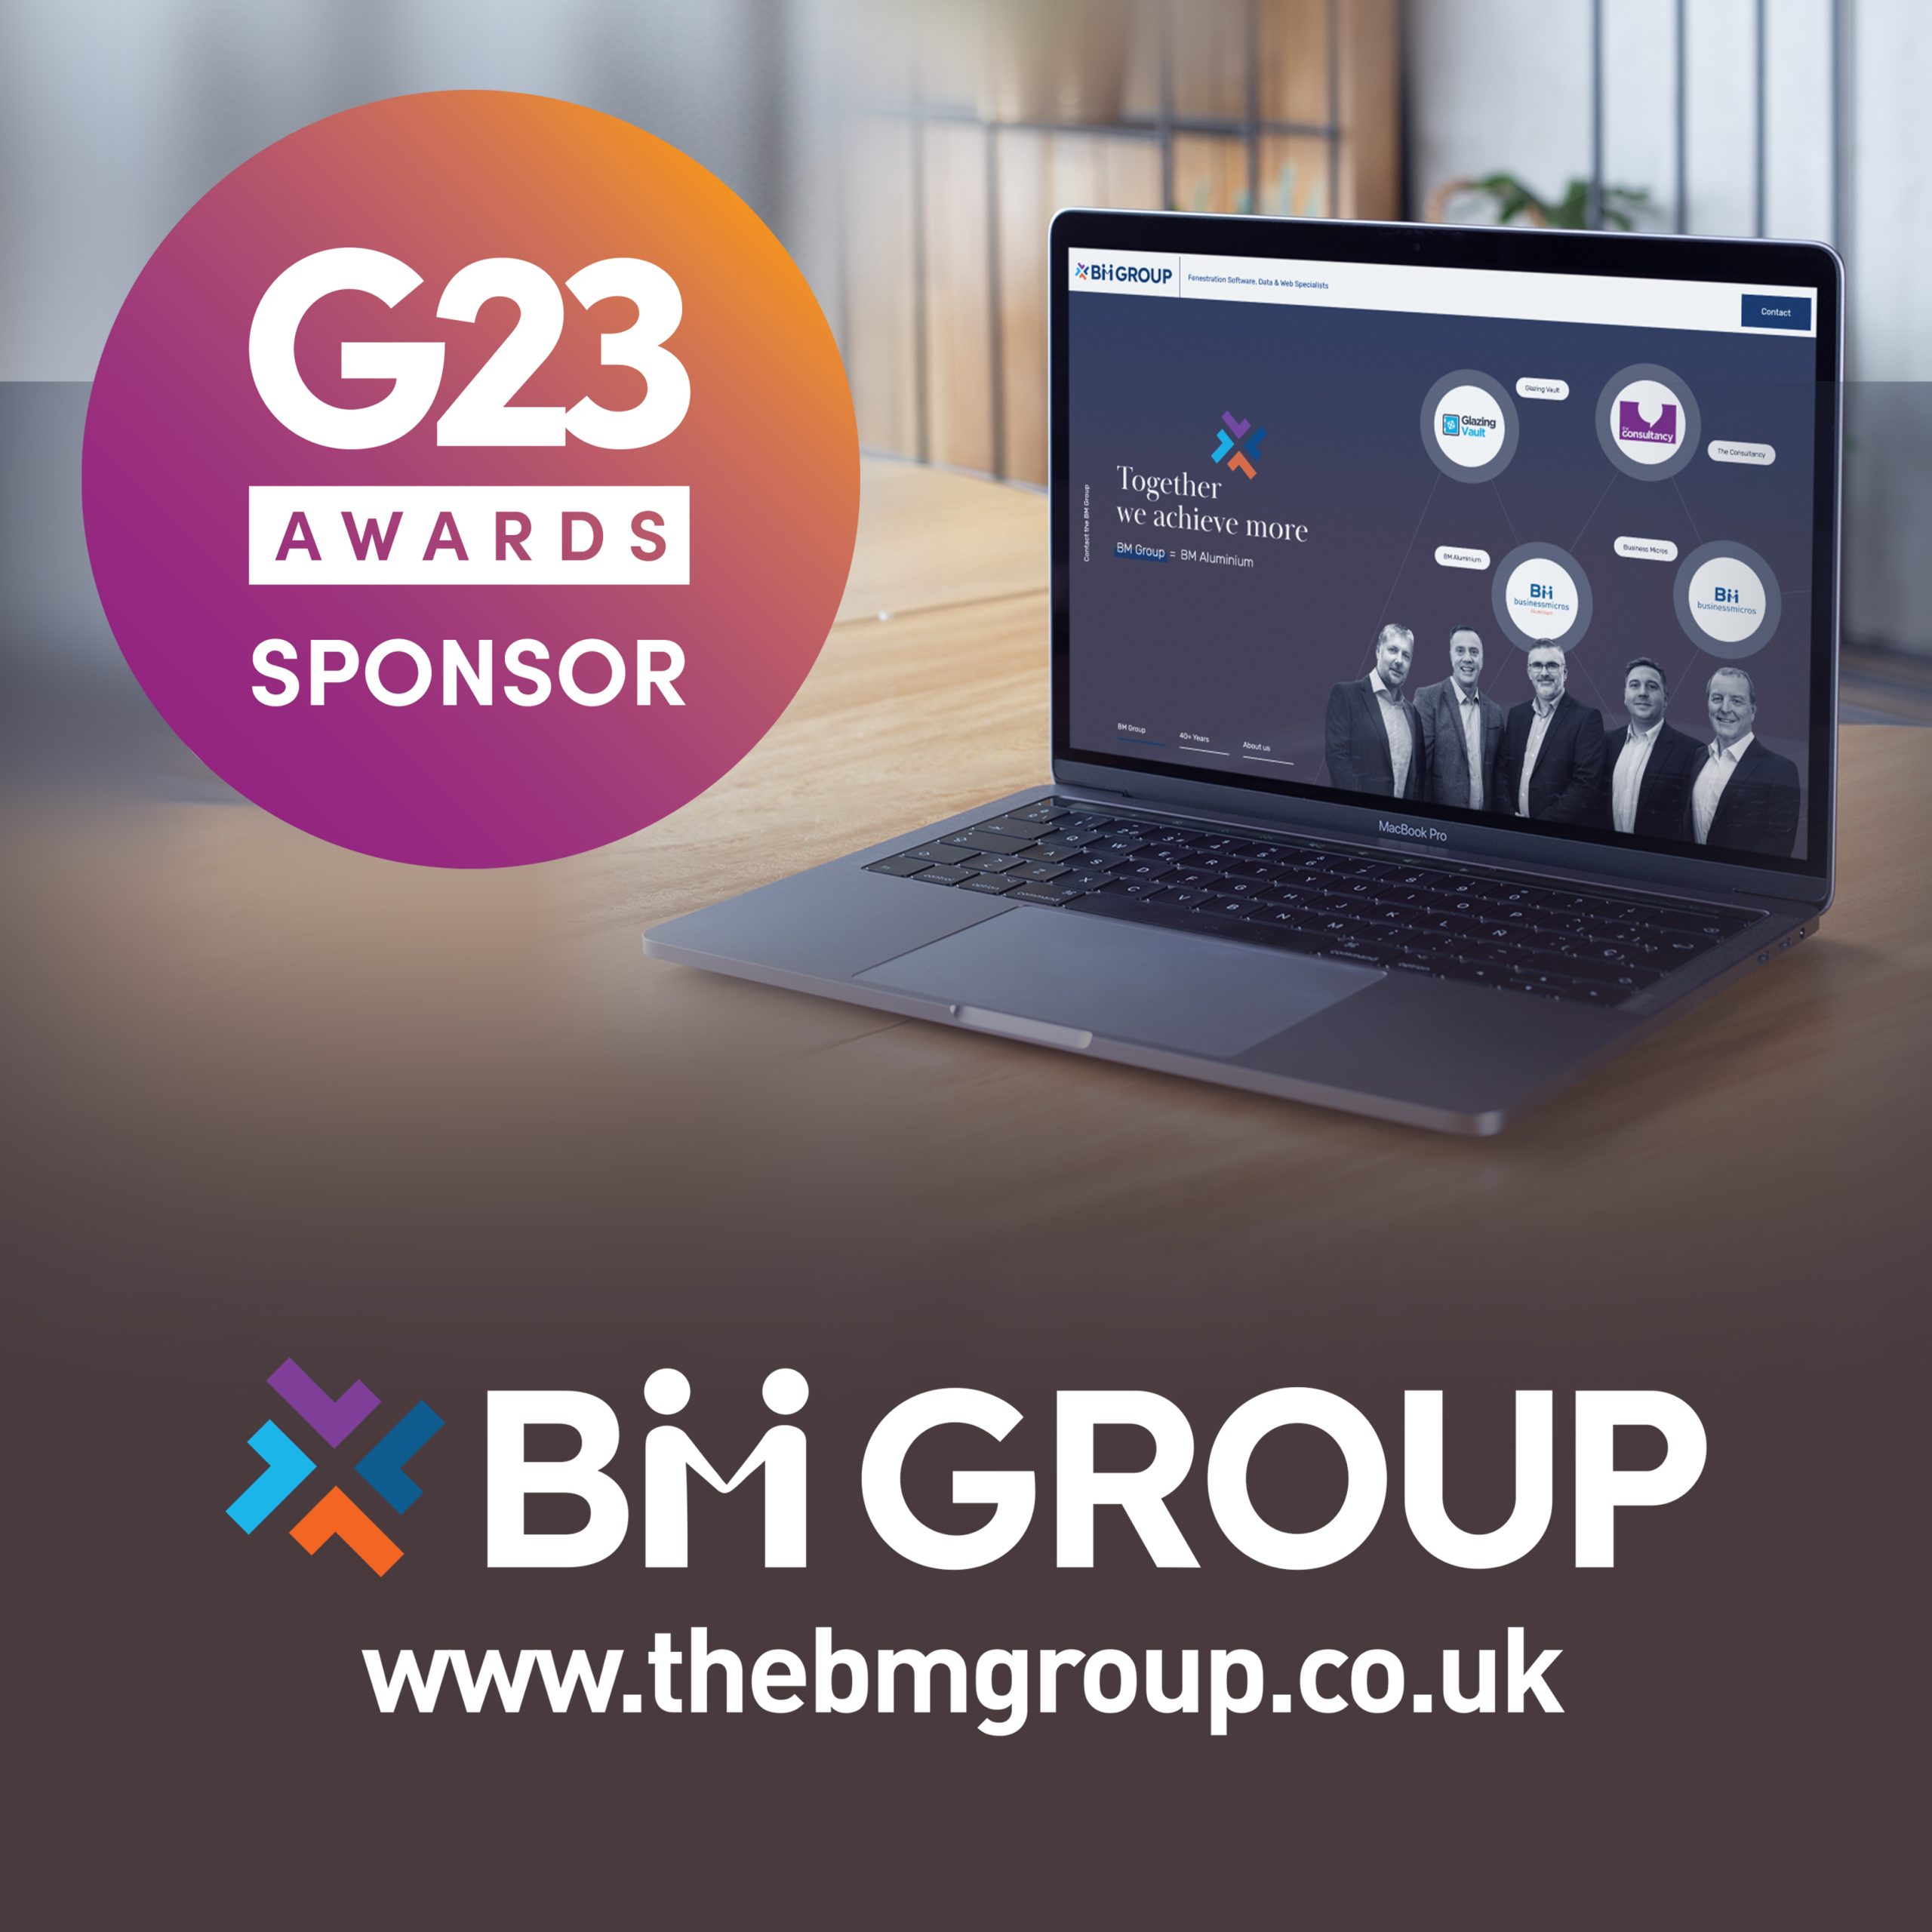 Business Micros | BM387 The Business Micros Group has been announced as a main sponsor at the G 23 Awards scaled